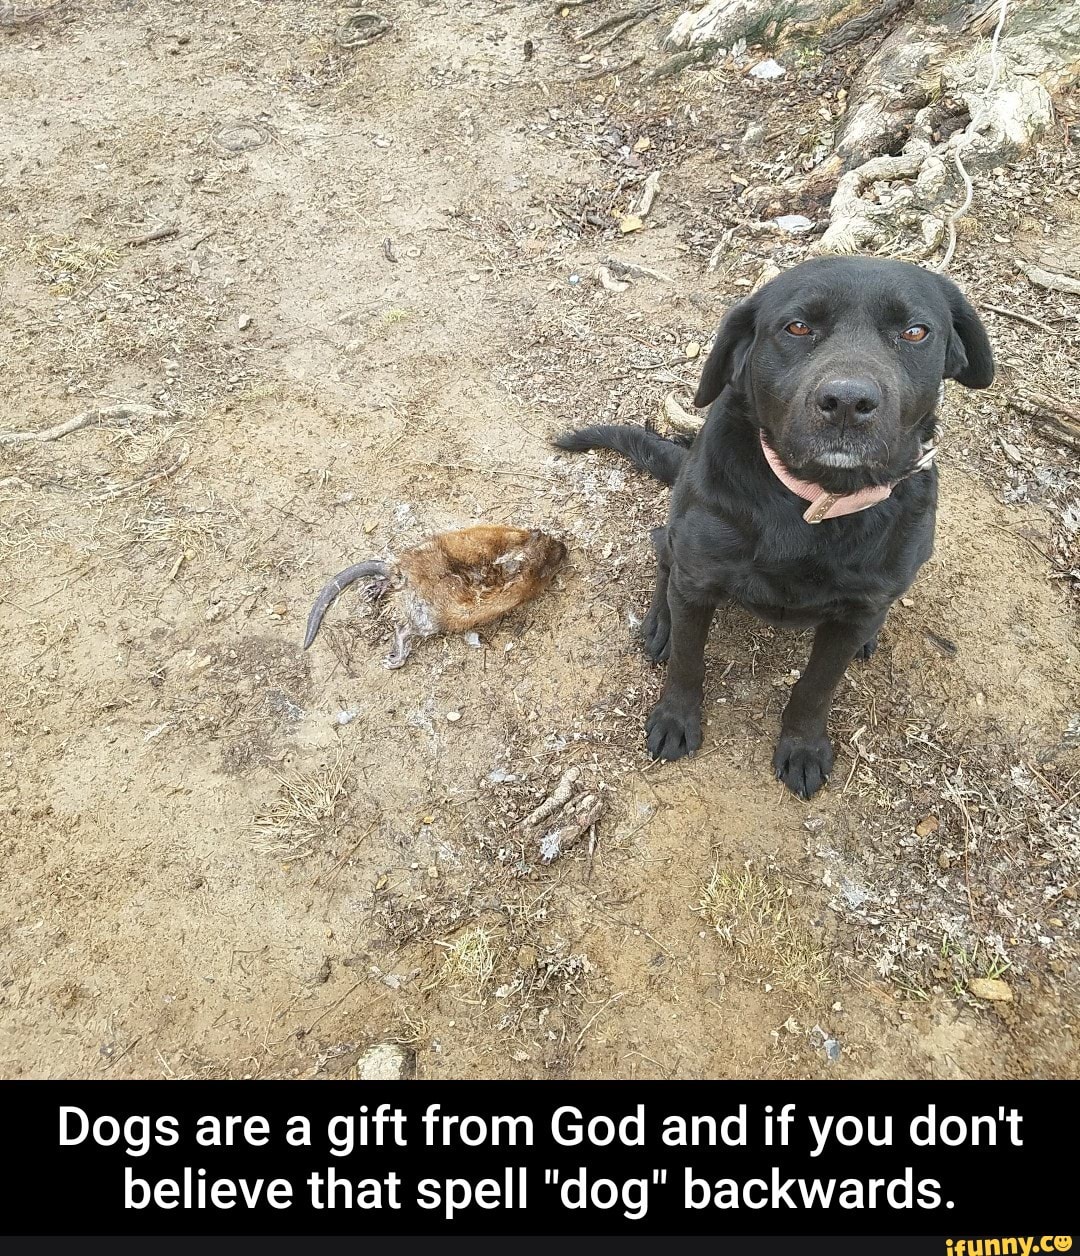 Dogs Are A Gift From God And If You Dont Believe That Spell Dog Backwards Dogs Are A Gift From God And If You Don T Believe That Spell Dog Backwards